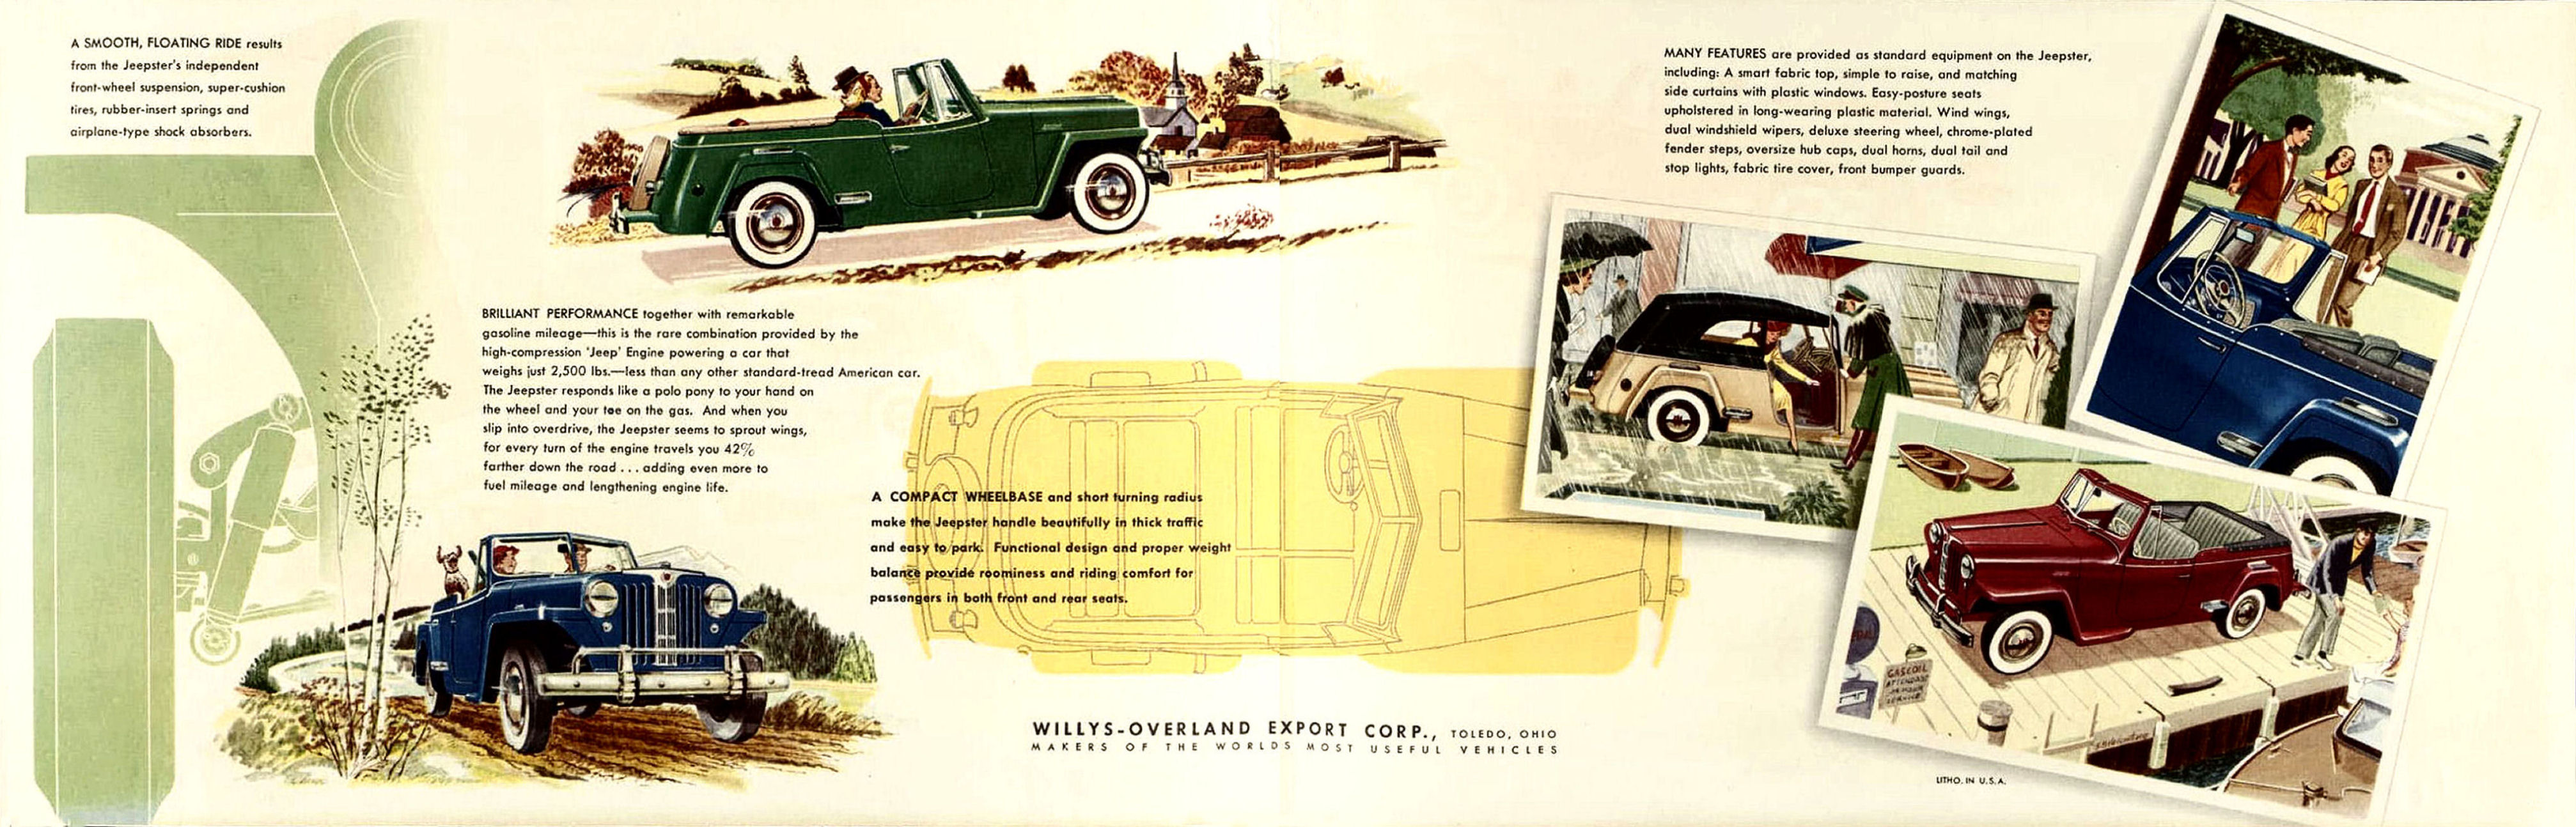 1948_Willys_Jeepster-04-05